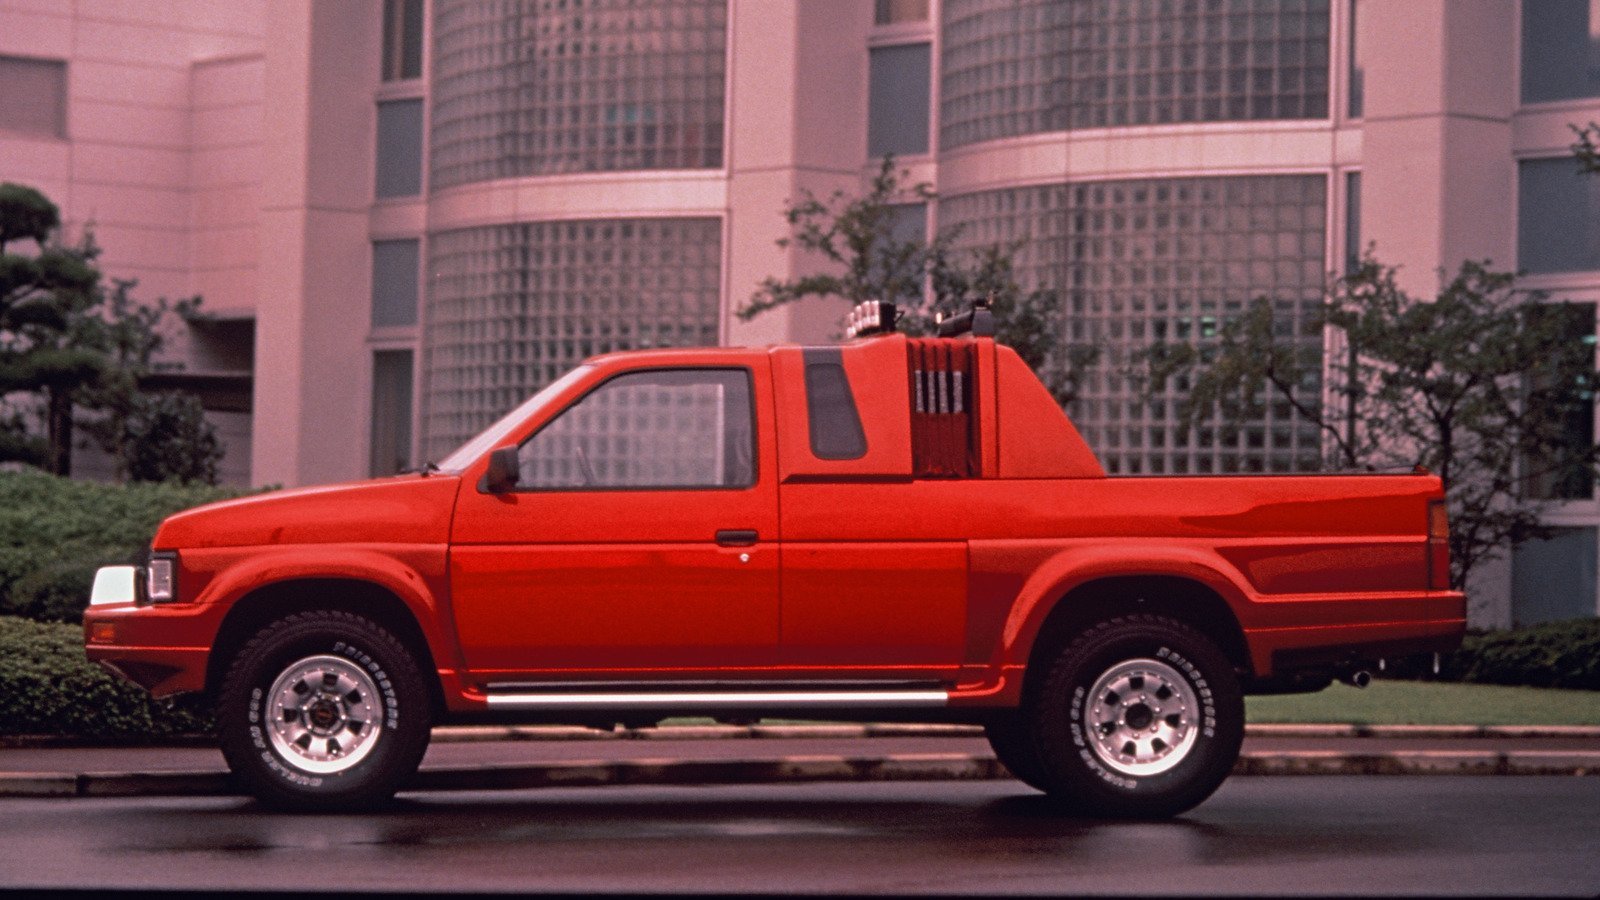 This Strange Nissan Concept Had A Cool Feature We'd Love To See On A New Truck